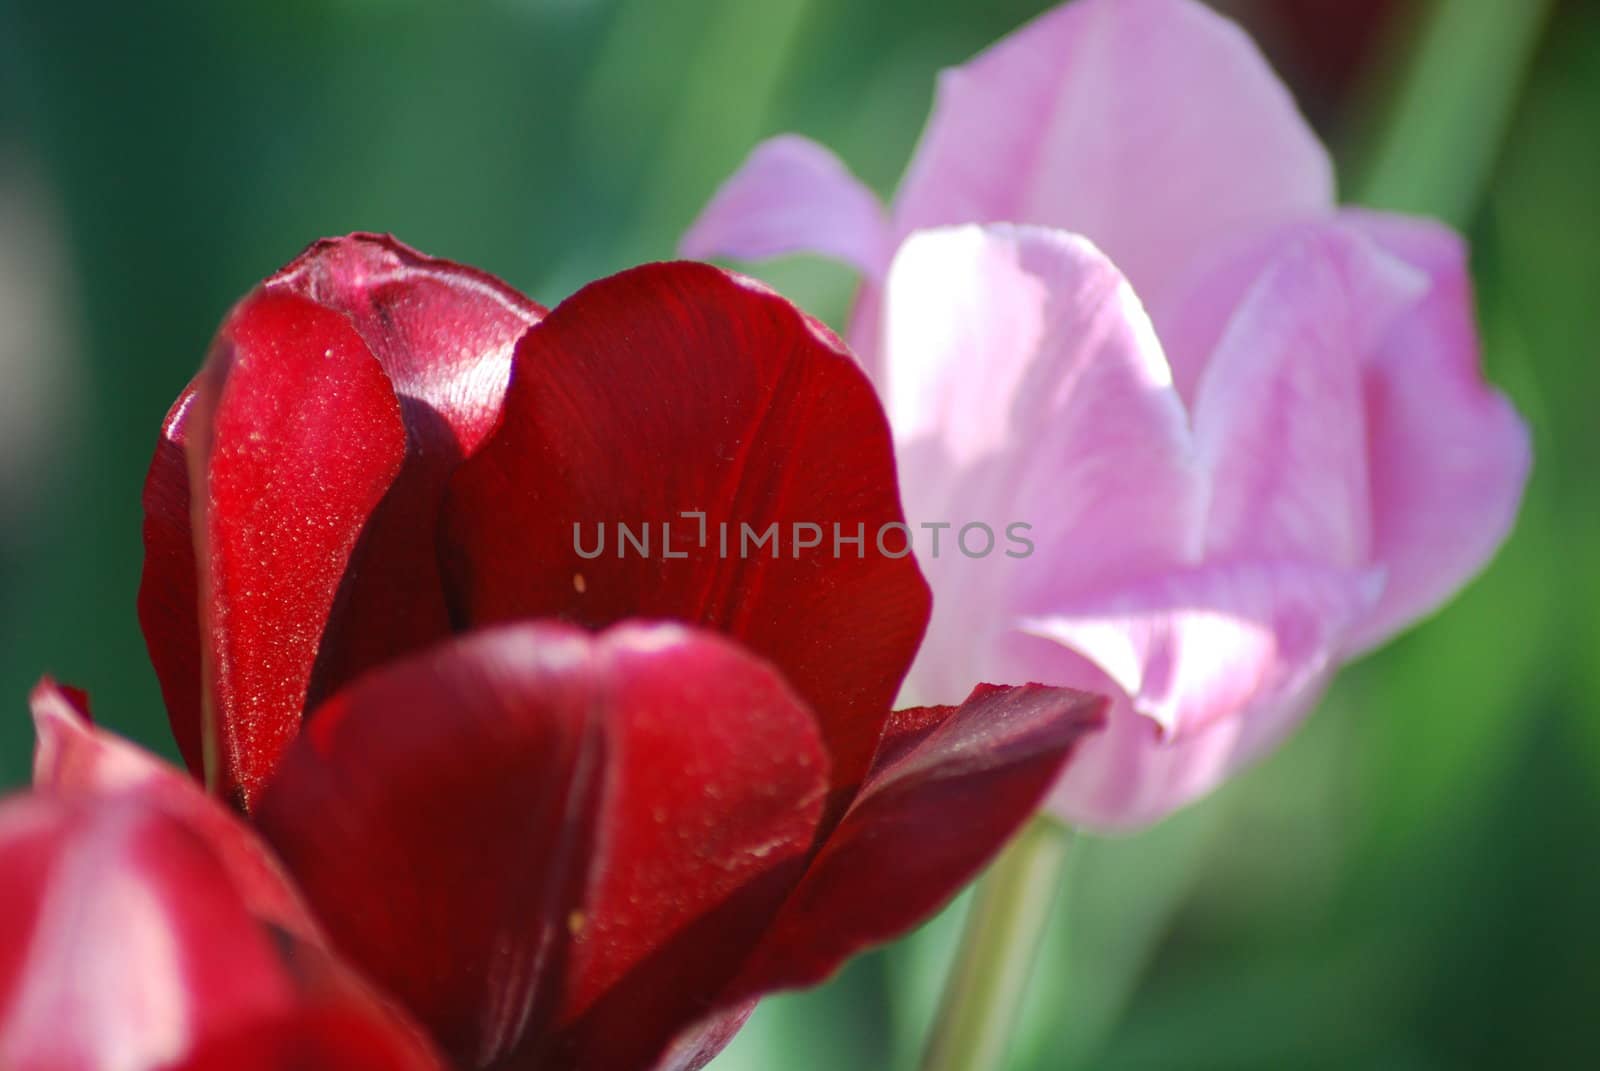 Two red and pink  tulips ,flowers background  